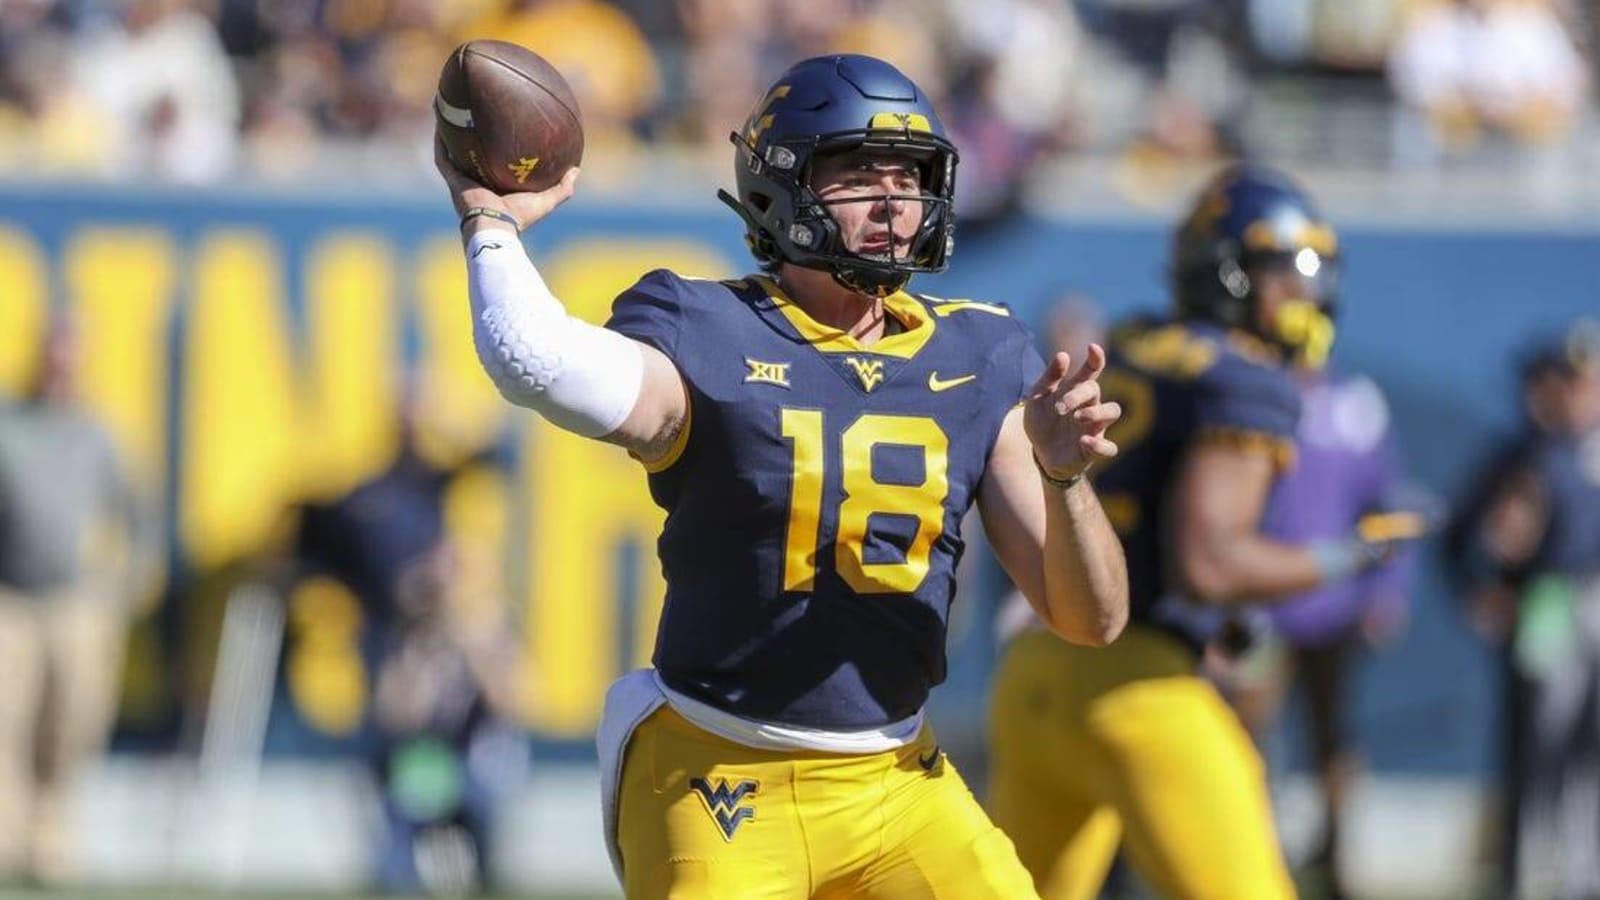 Report: West Virginia benches starting QB JT Daniels